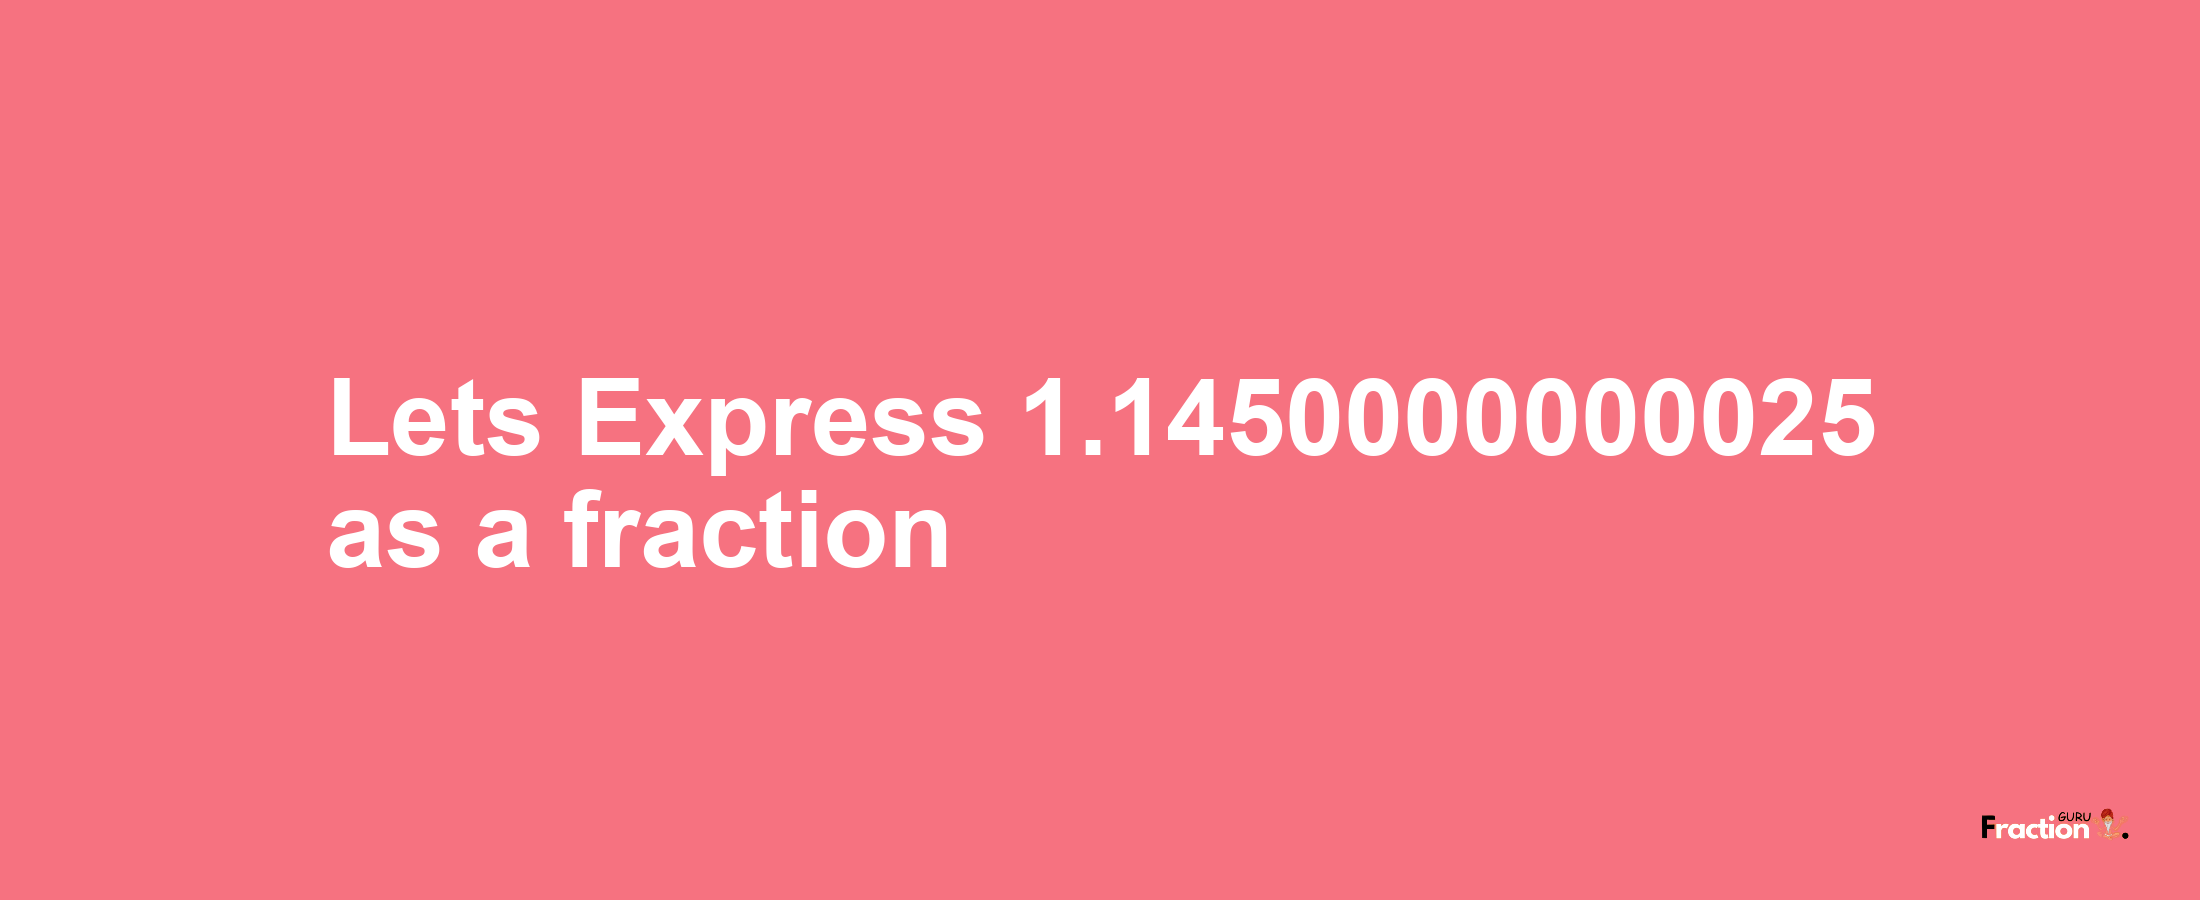 Lets Express 1.1450000000025 as afraction